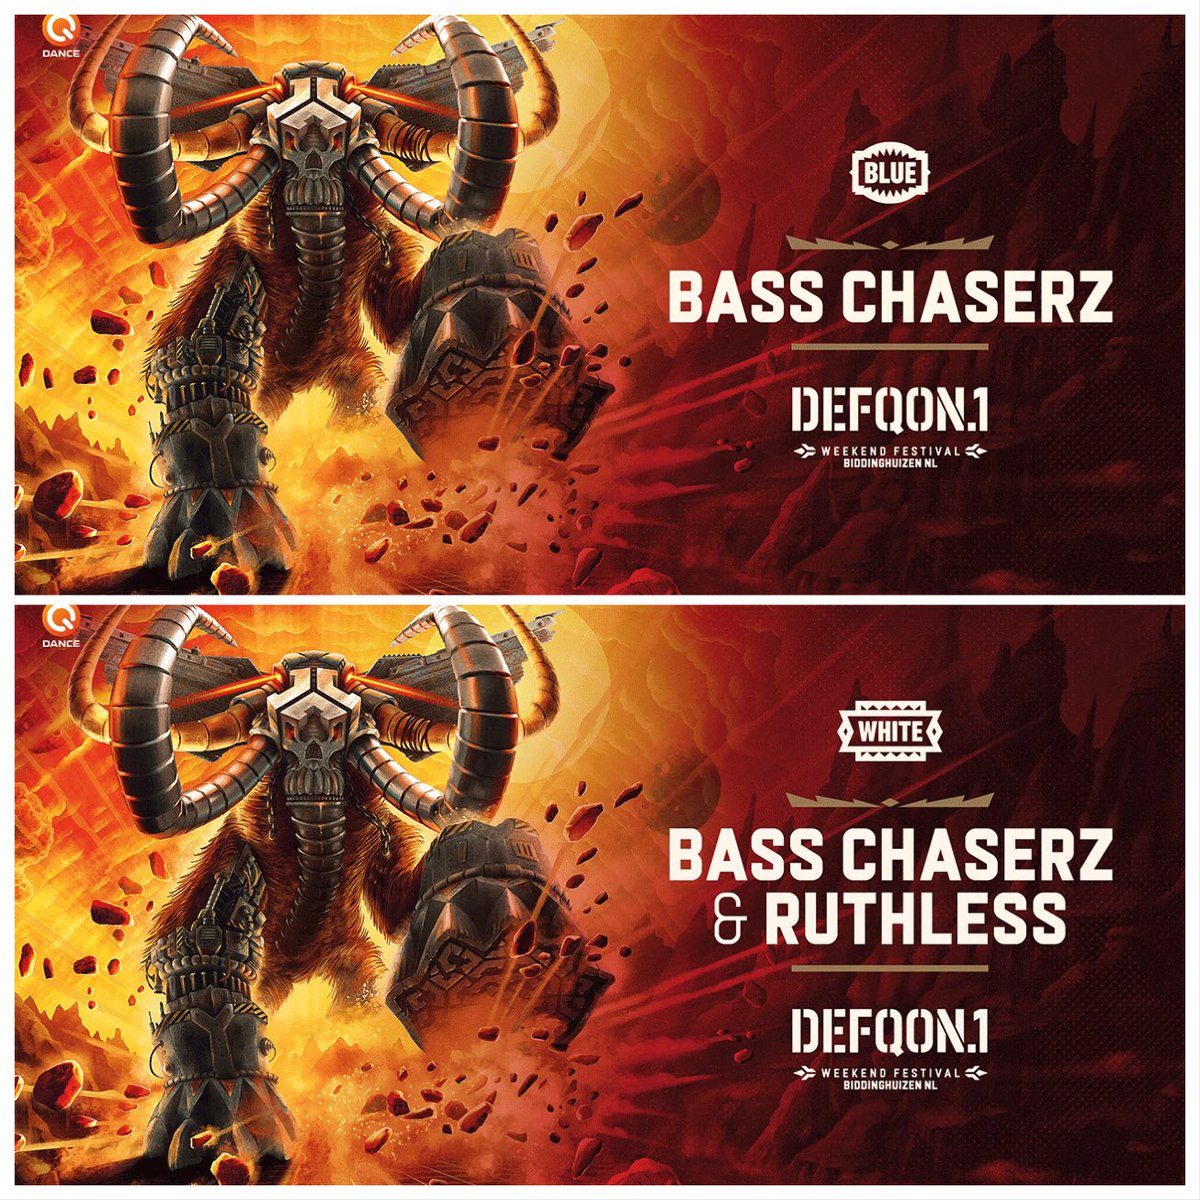 MAXIMUM FORCE at @Defqon1Festival 

▶️Saturday Nightparty: BLUE
▶️Sunday: WHITE with @RuthlessNL 

Partytime🔥⚒️🔥⚒️🔥⚒️🔥⚒️🔥
#raw #hardstyle #partystyle #AATeam #defqon1 #DQ18